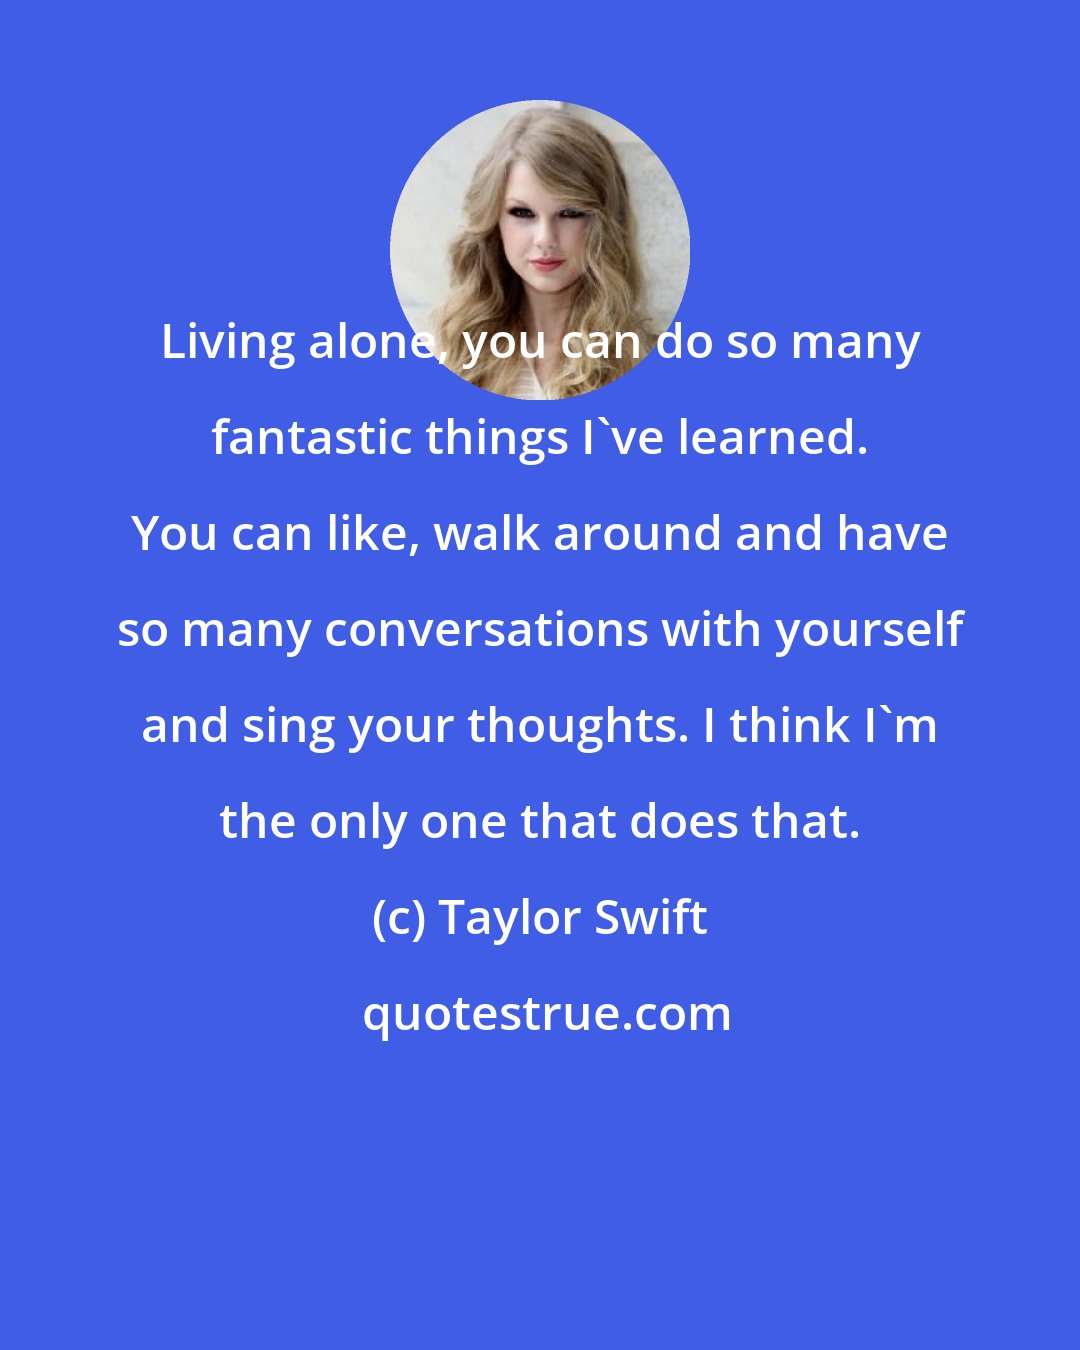 Taylor Swift: Living alone, you can do so many fantastic things I've learned. You can like, walk around and have so many conversations with yourself and sing your thoughts. I think I'm the only one that does that.